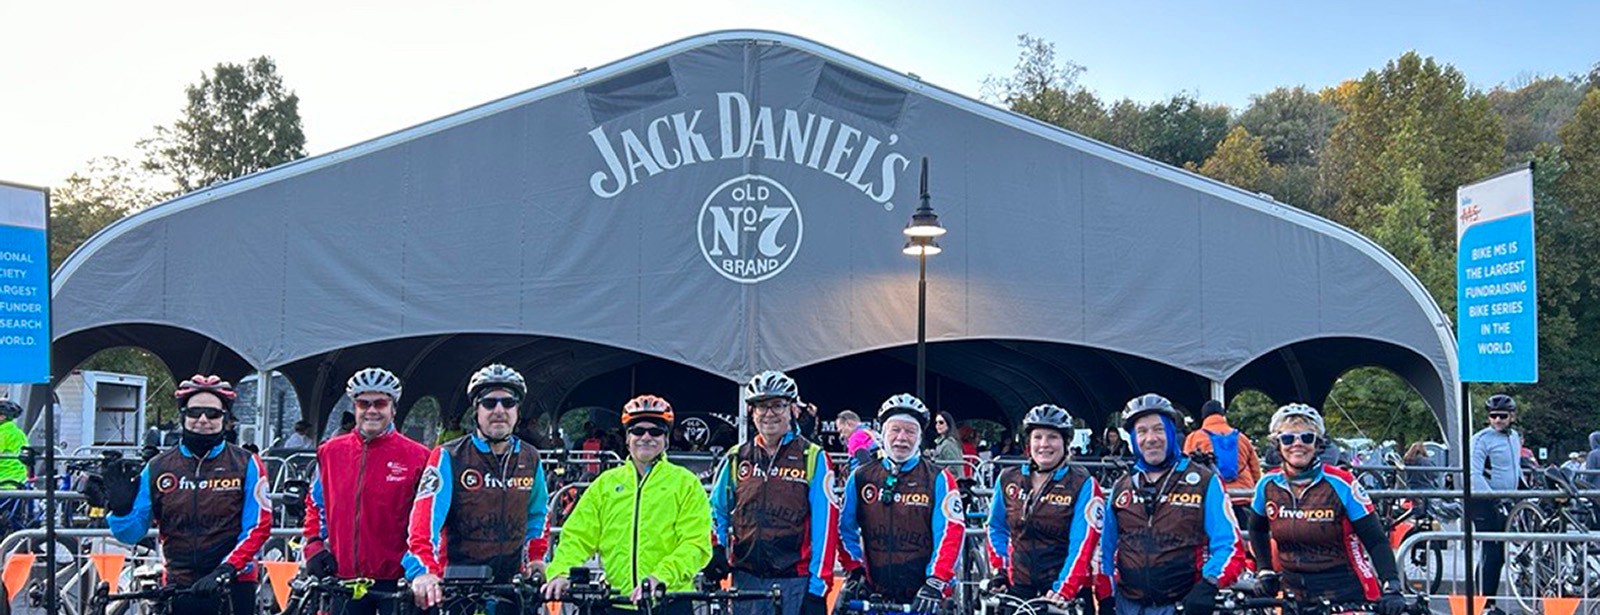 People standing with bikes in front of a tent that reads 'Jack Daniel's'